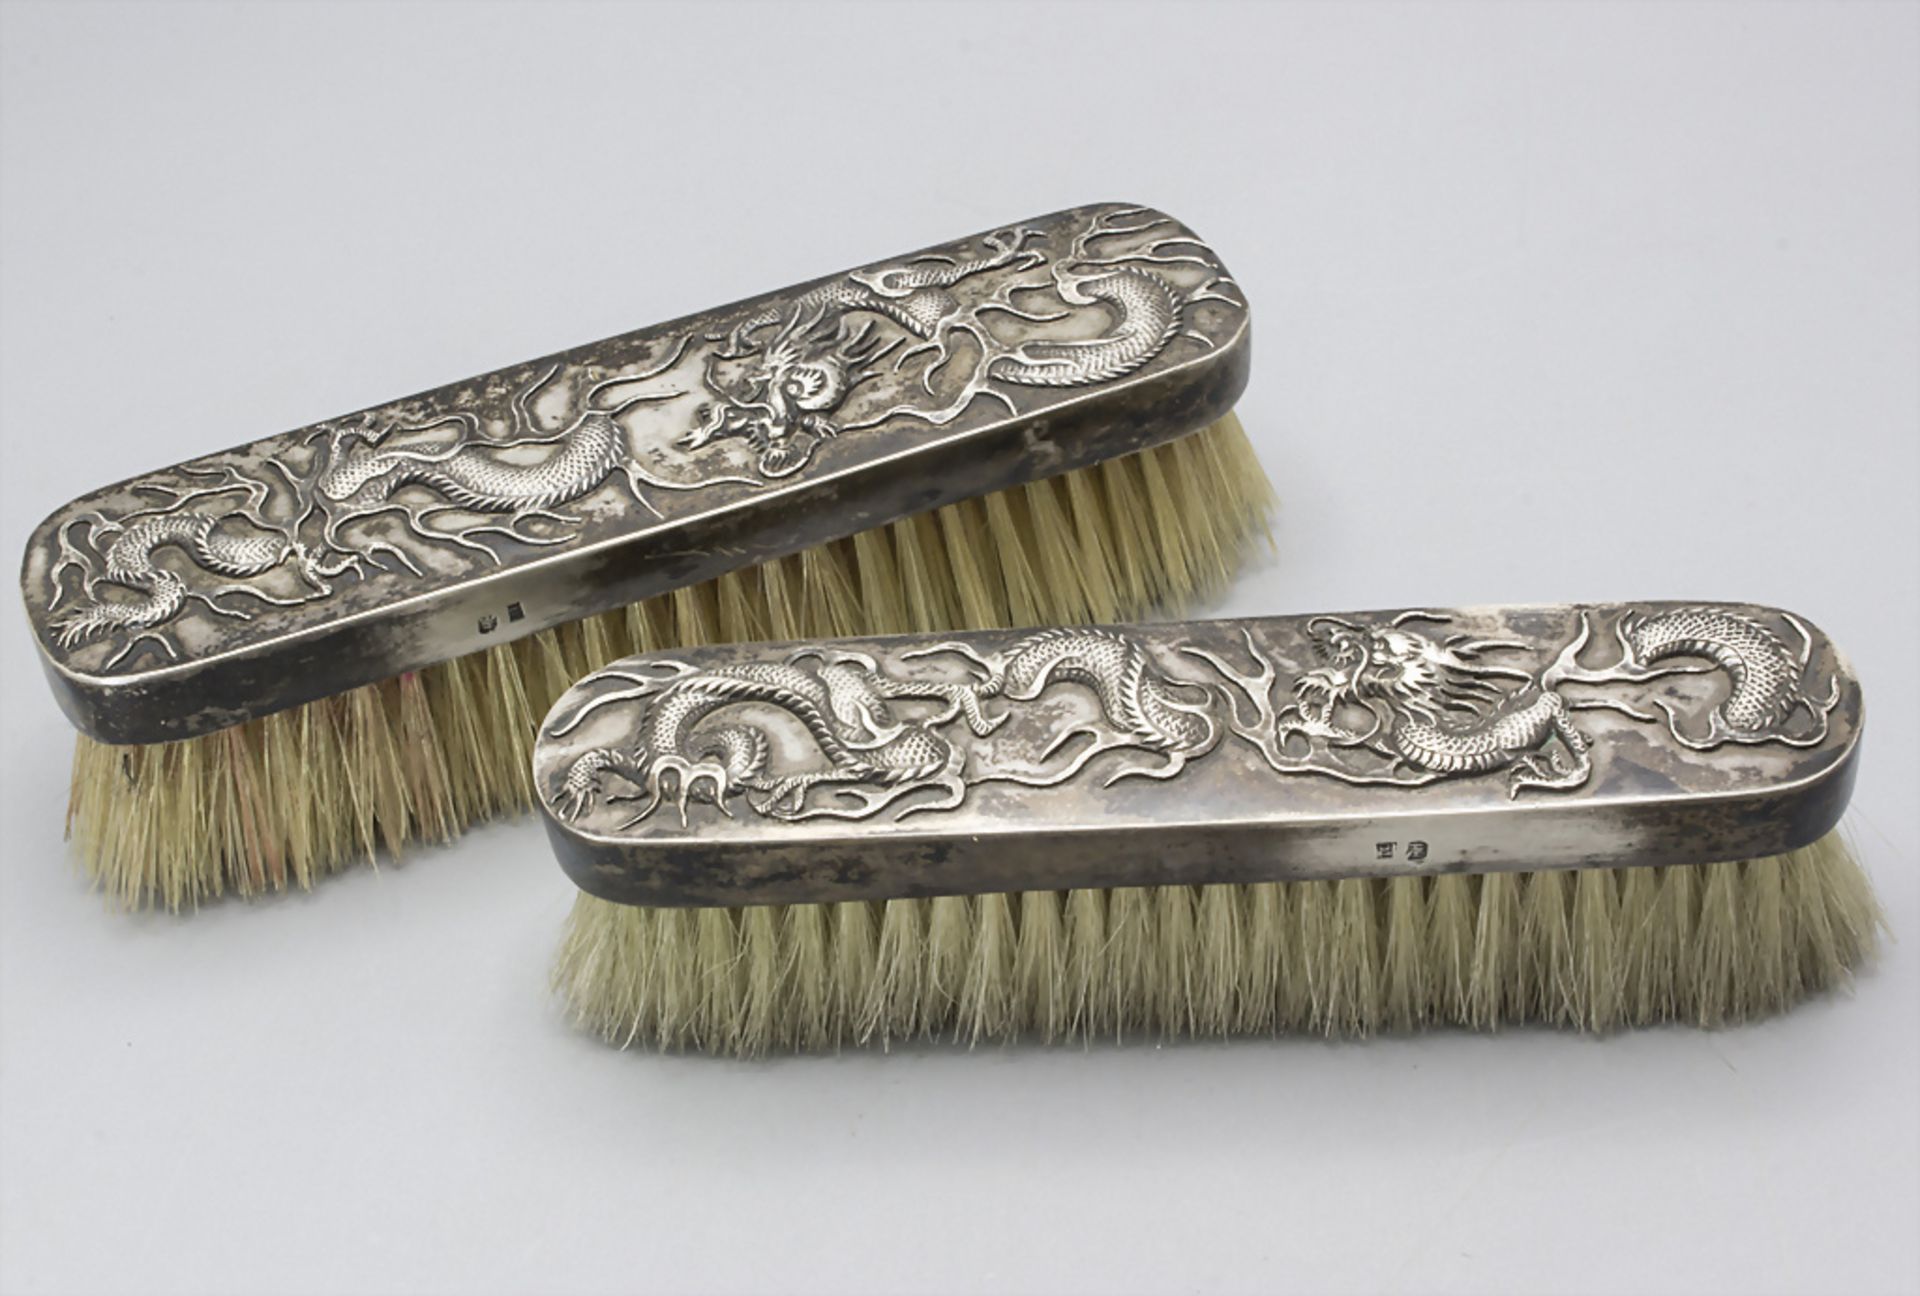 2 Kleiderbürsten / Two clothes brushes, Tuck Chang & Co., Shanghai, um 1900